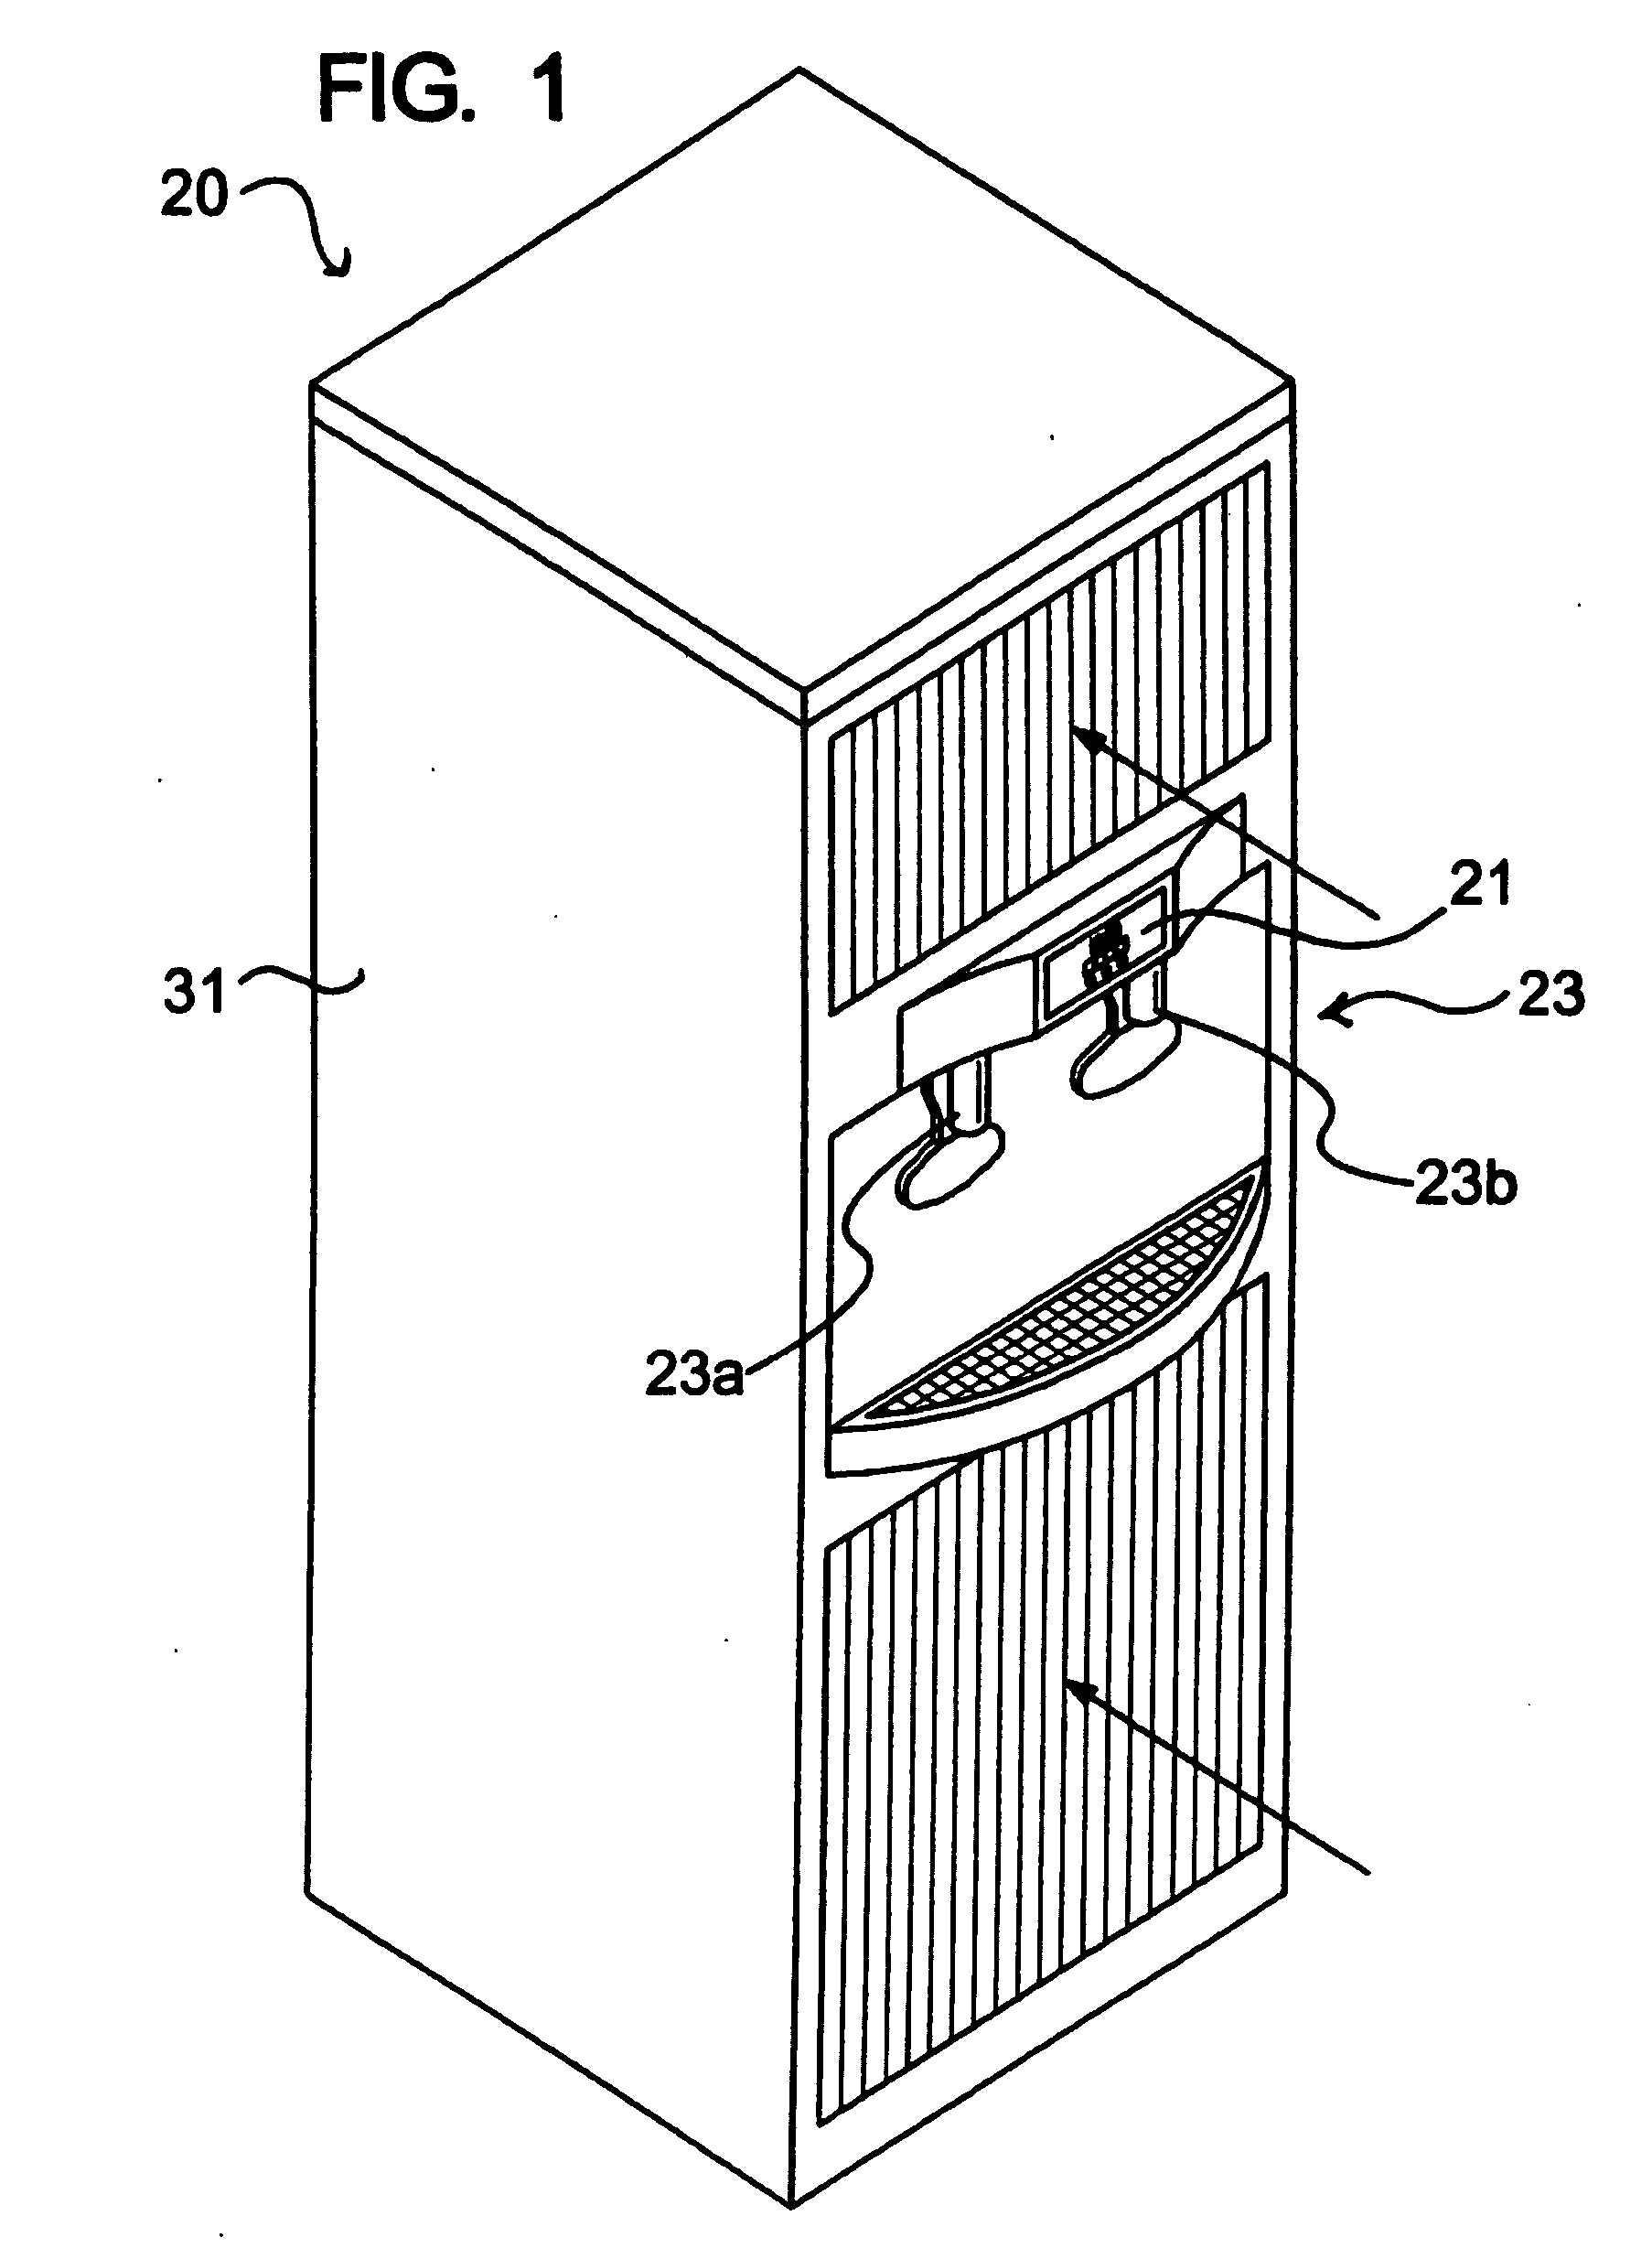 Water producing method and apparatus